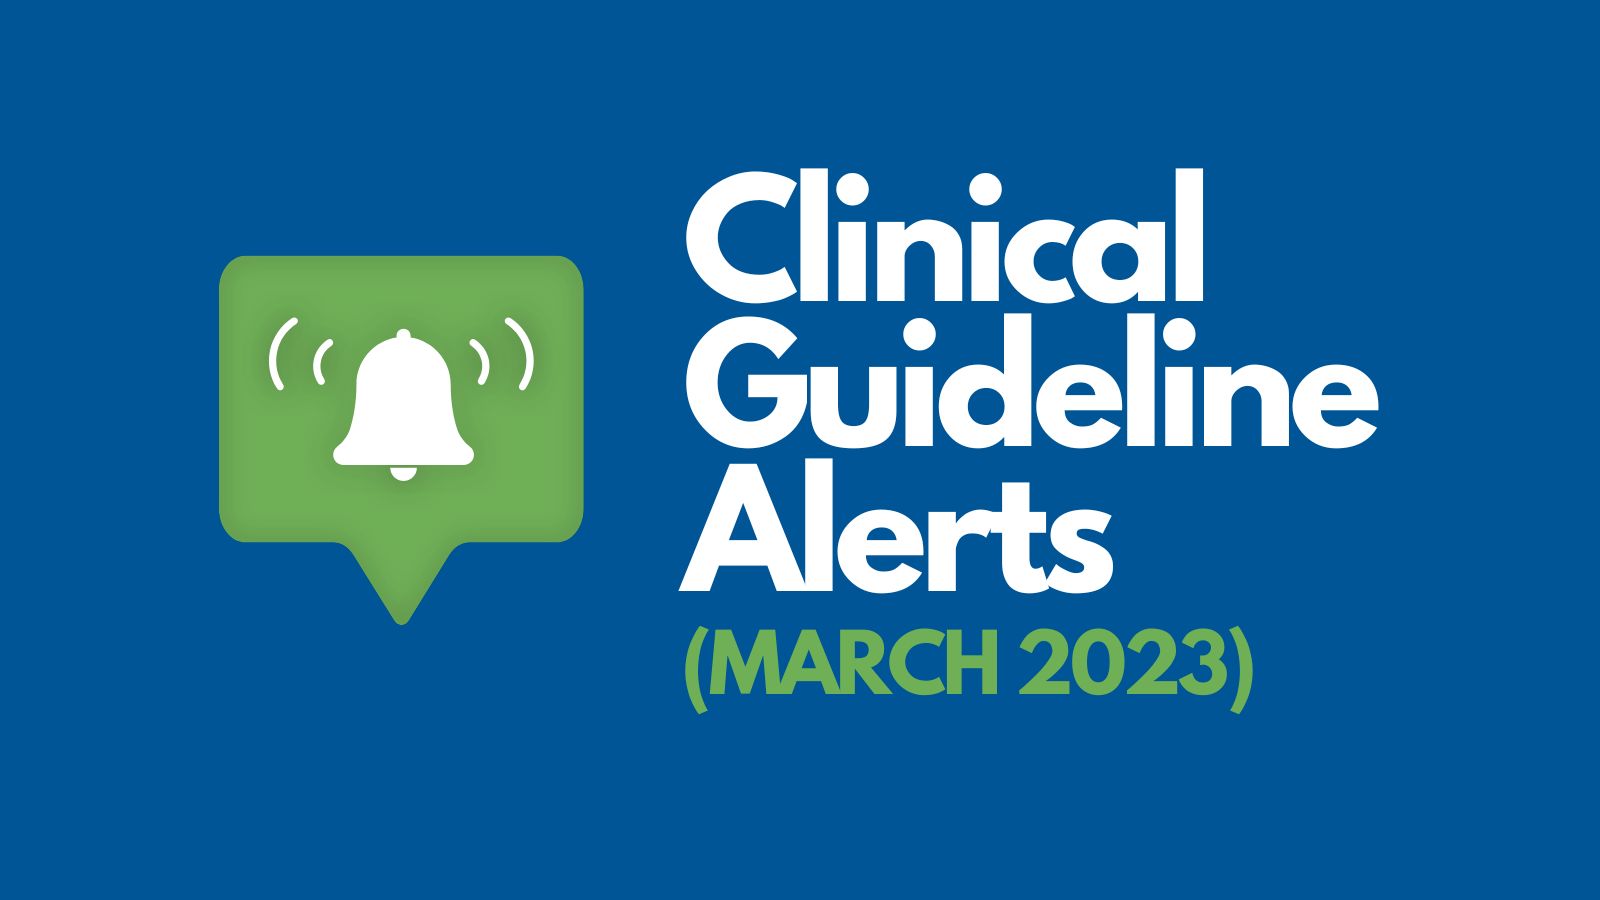 Clinical Guidelines Alert March 2023 Hero Image